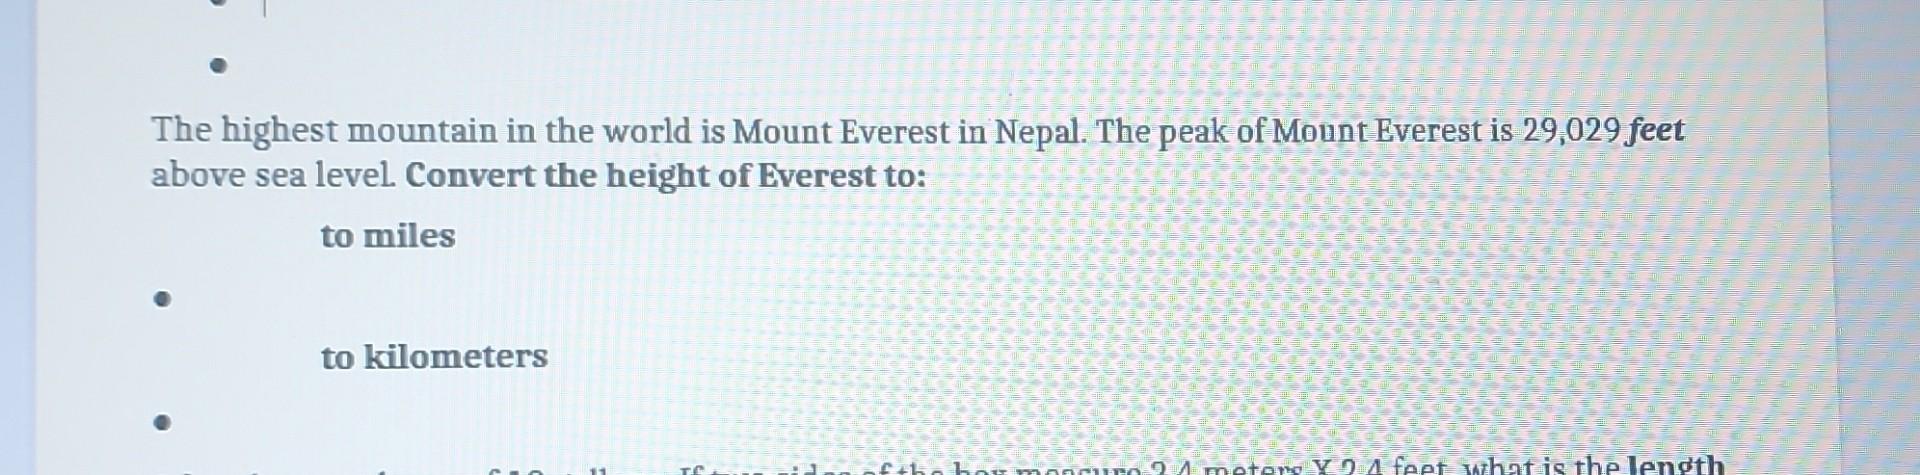 The highest mountain in the world is Mount Everest in Nepal. The peak of Mount Everest is 29,029 feet above